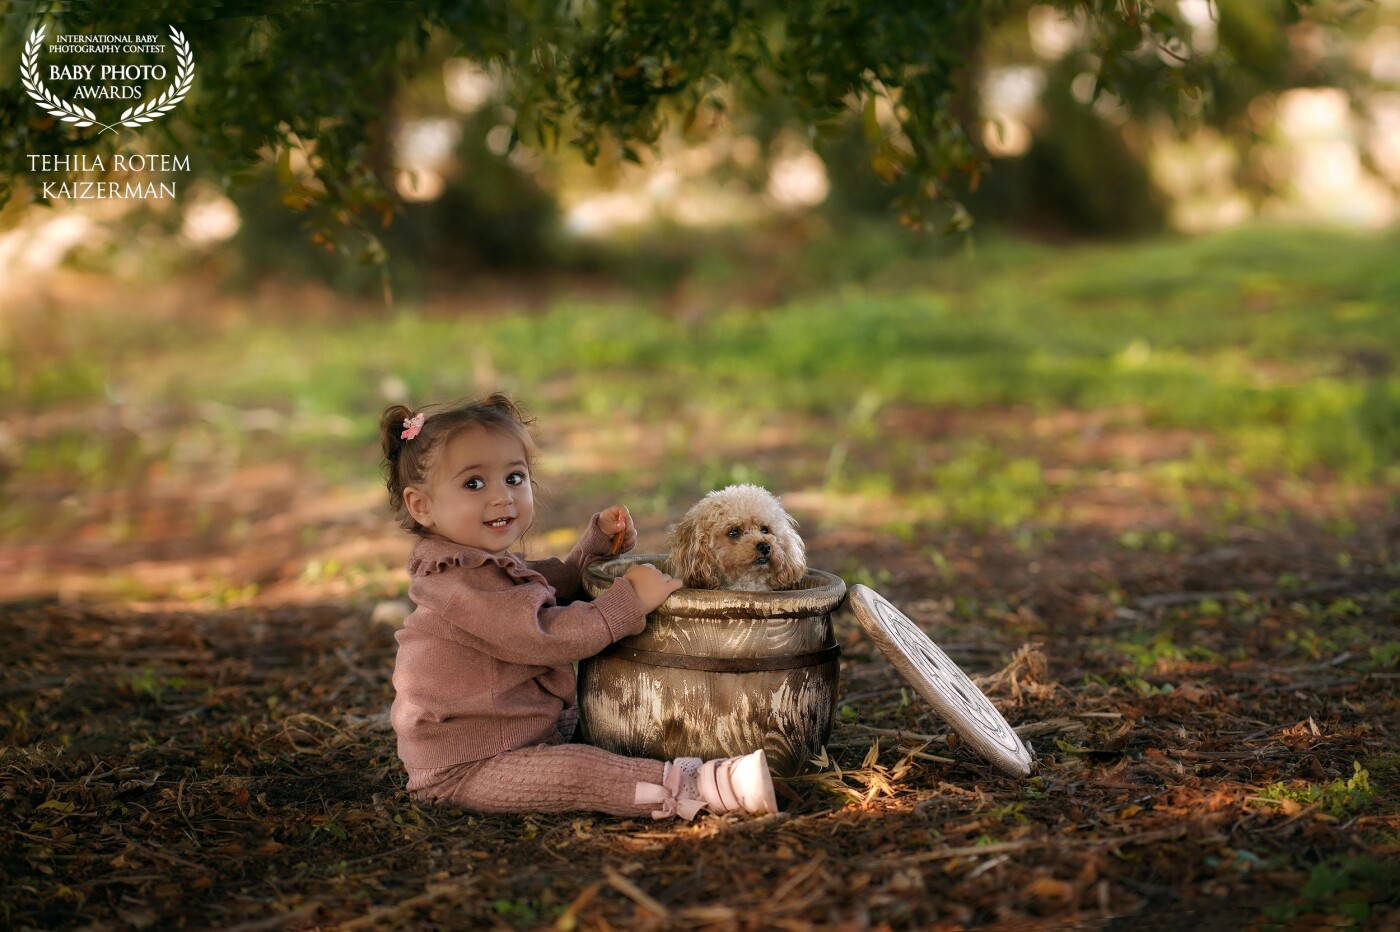 This beautiful girl name is Lenny she is adorable little lady she was very happy in this photo shoot… and the little dog was amazing and like to be in the jug.. and yes this girl.. she’s my daughter❤️